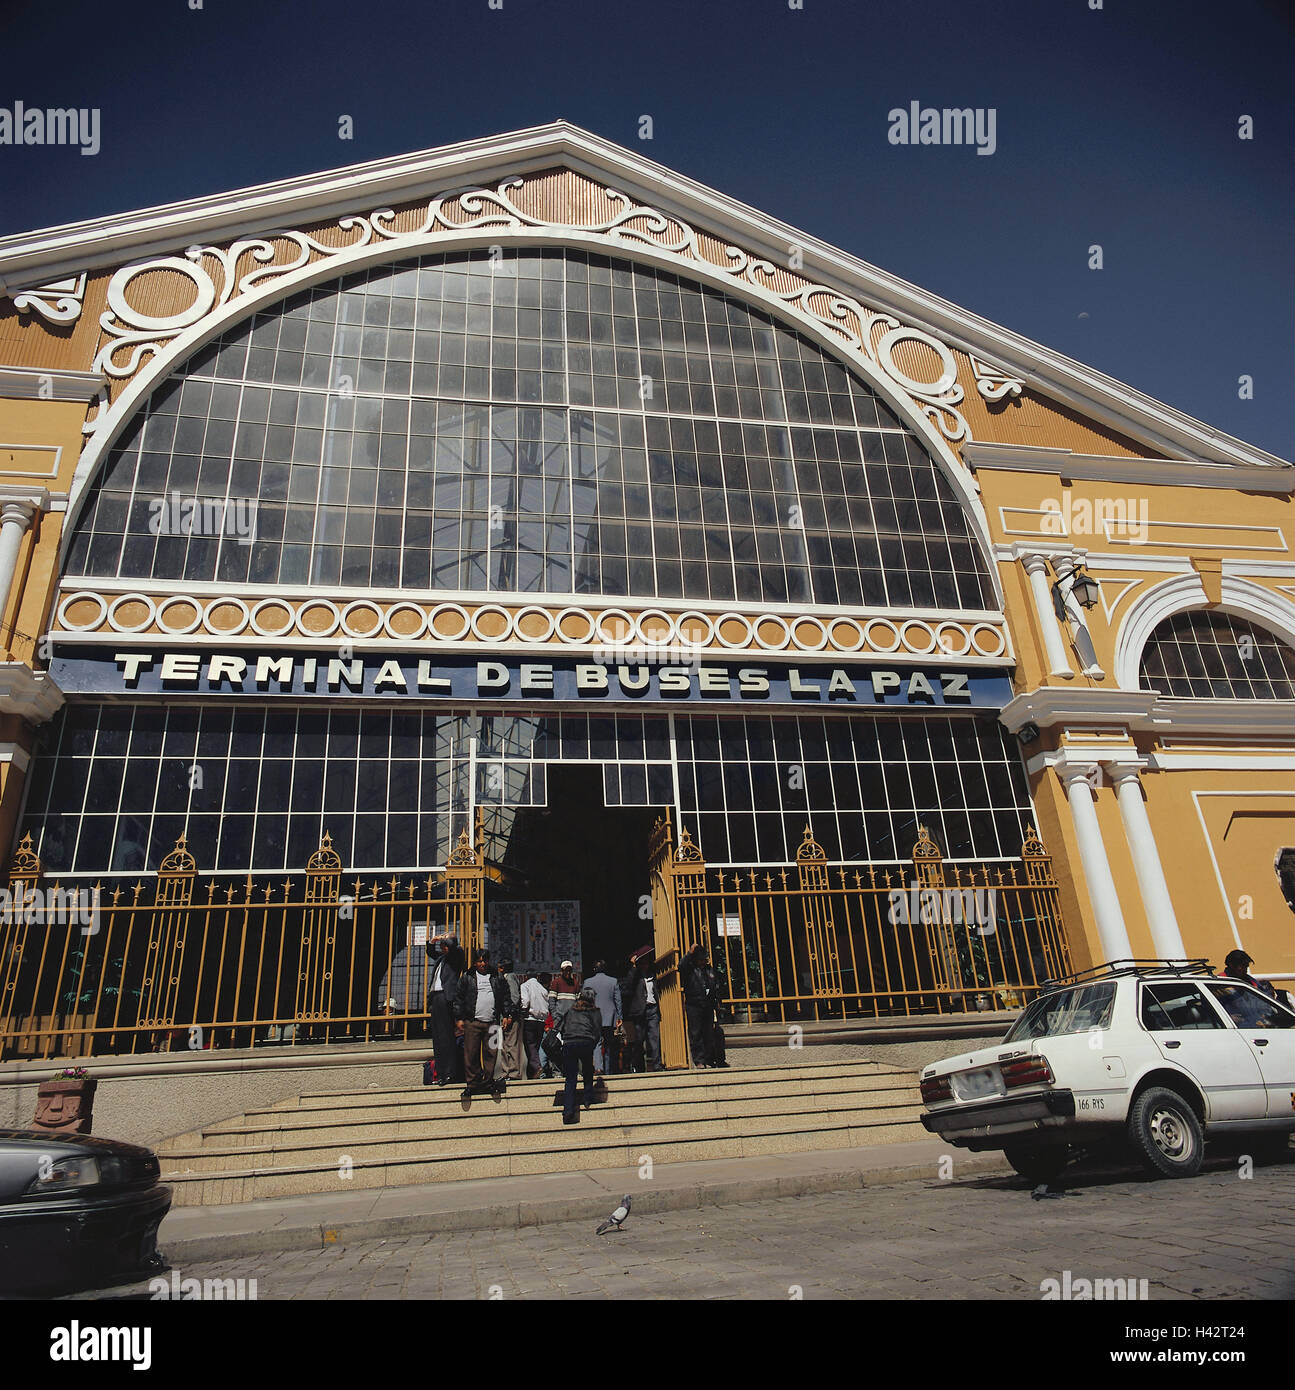 Bolivia, La Paz, bus terminal, South America, town, city, capital, building, architecture, facade, input, stairs, person, outside, Stock Photo